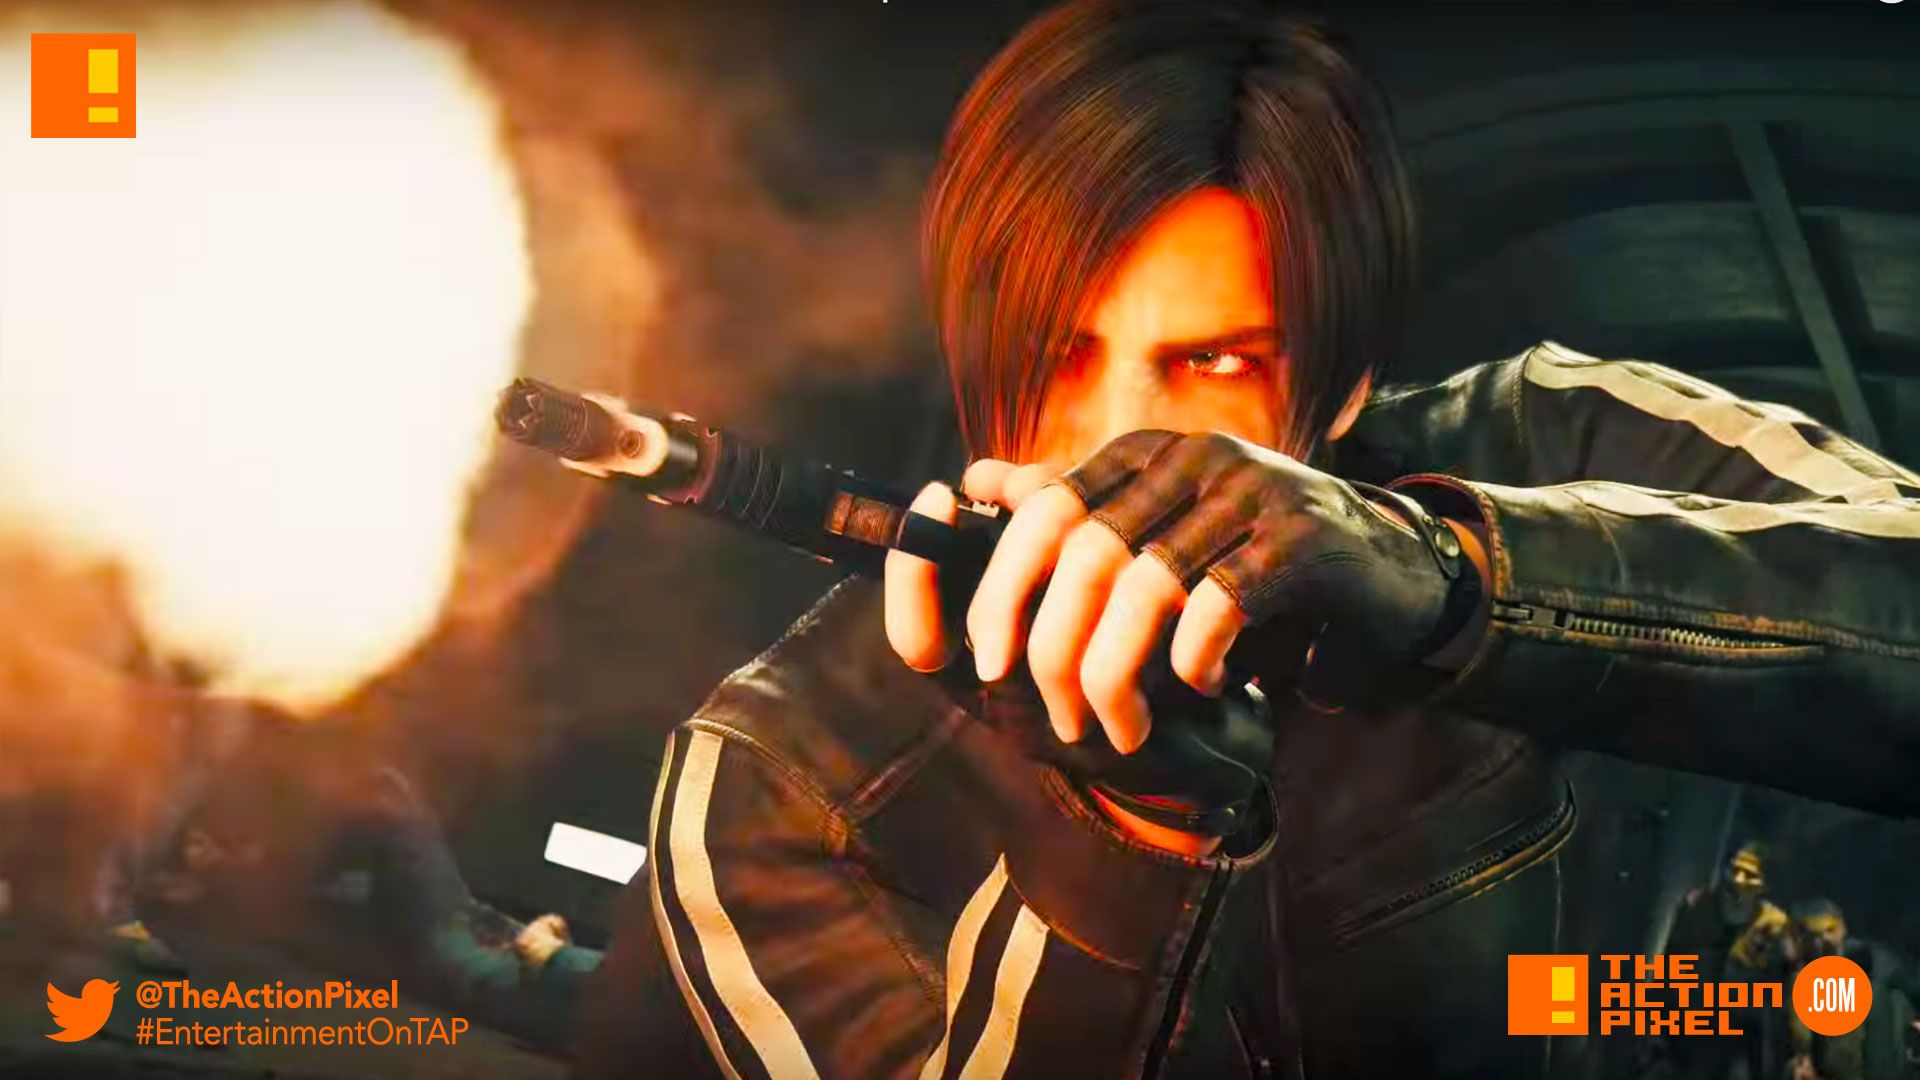 New “Resident Evil: Vendetta” clip shows us how to effectively disband a zombie horde in close quarters